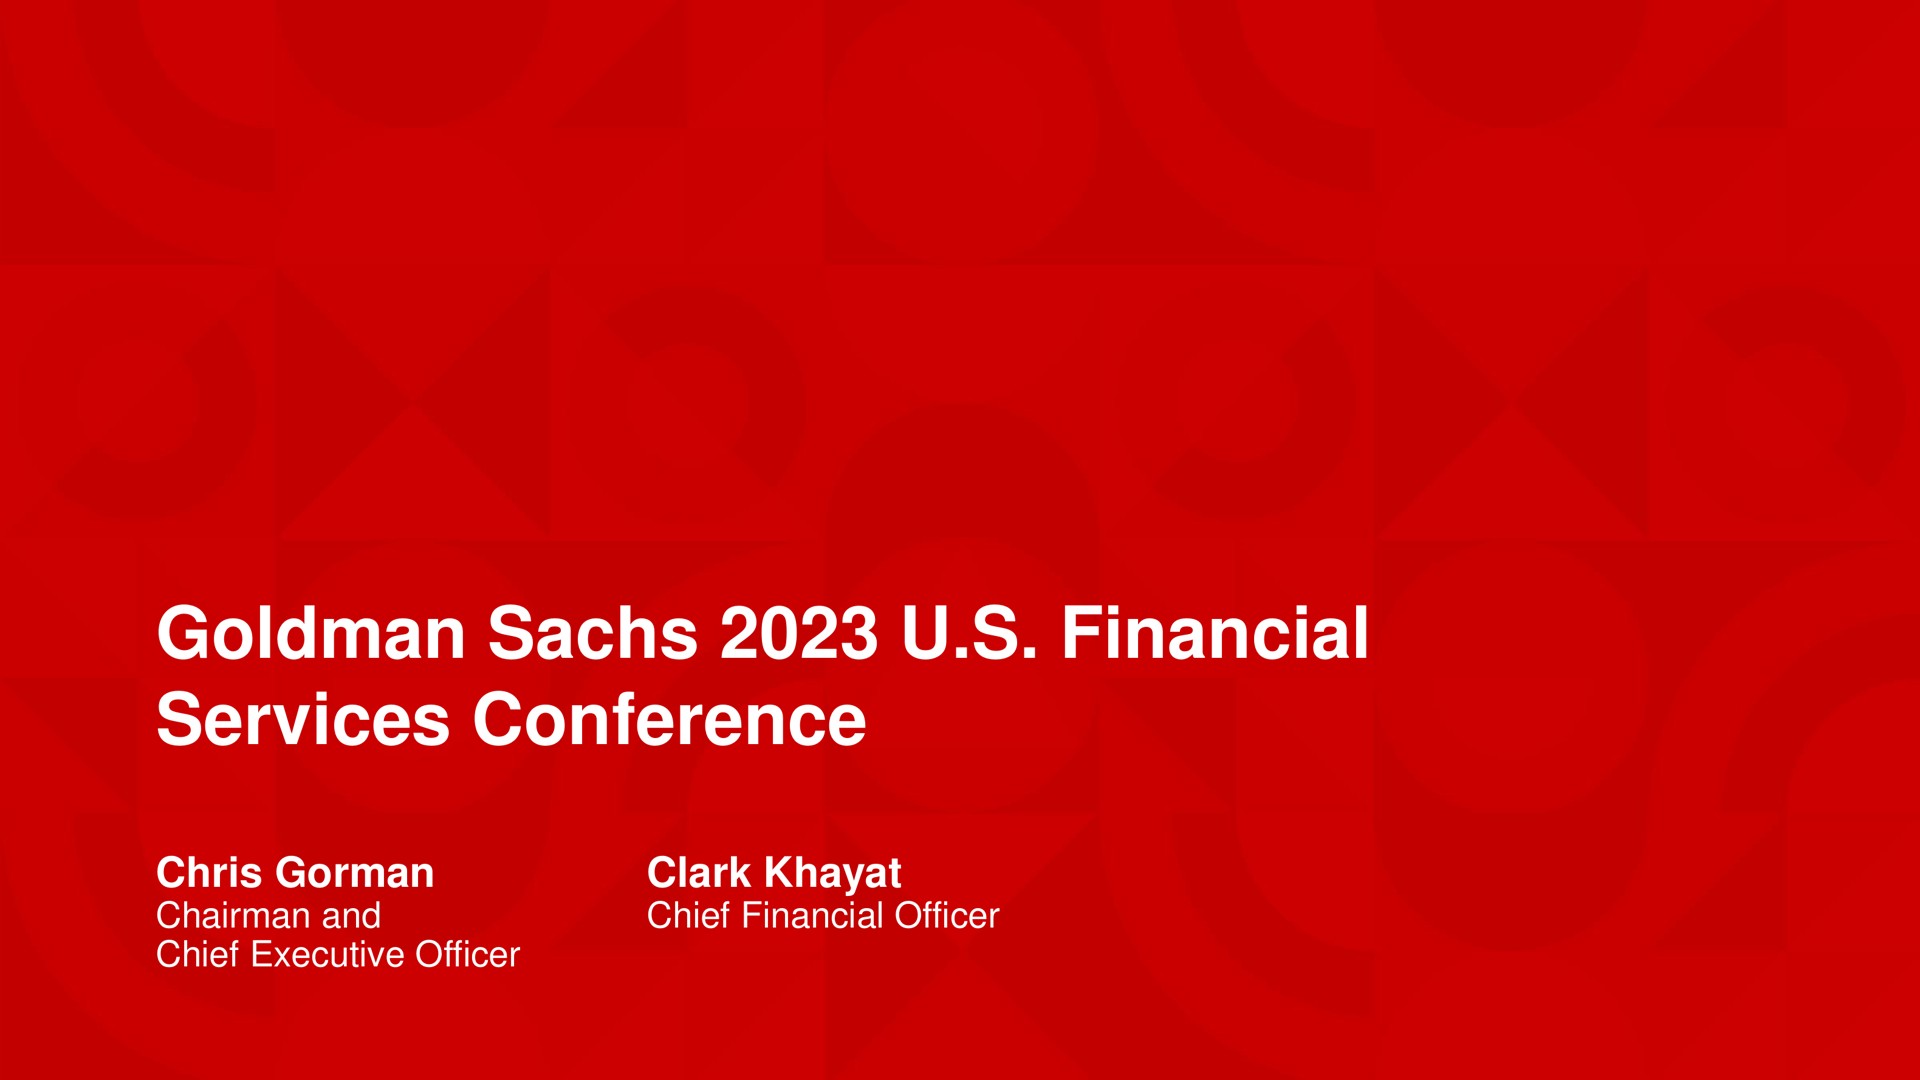 financial services conference chairman and chief executive officer clark chief financial officer | KeyCorp